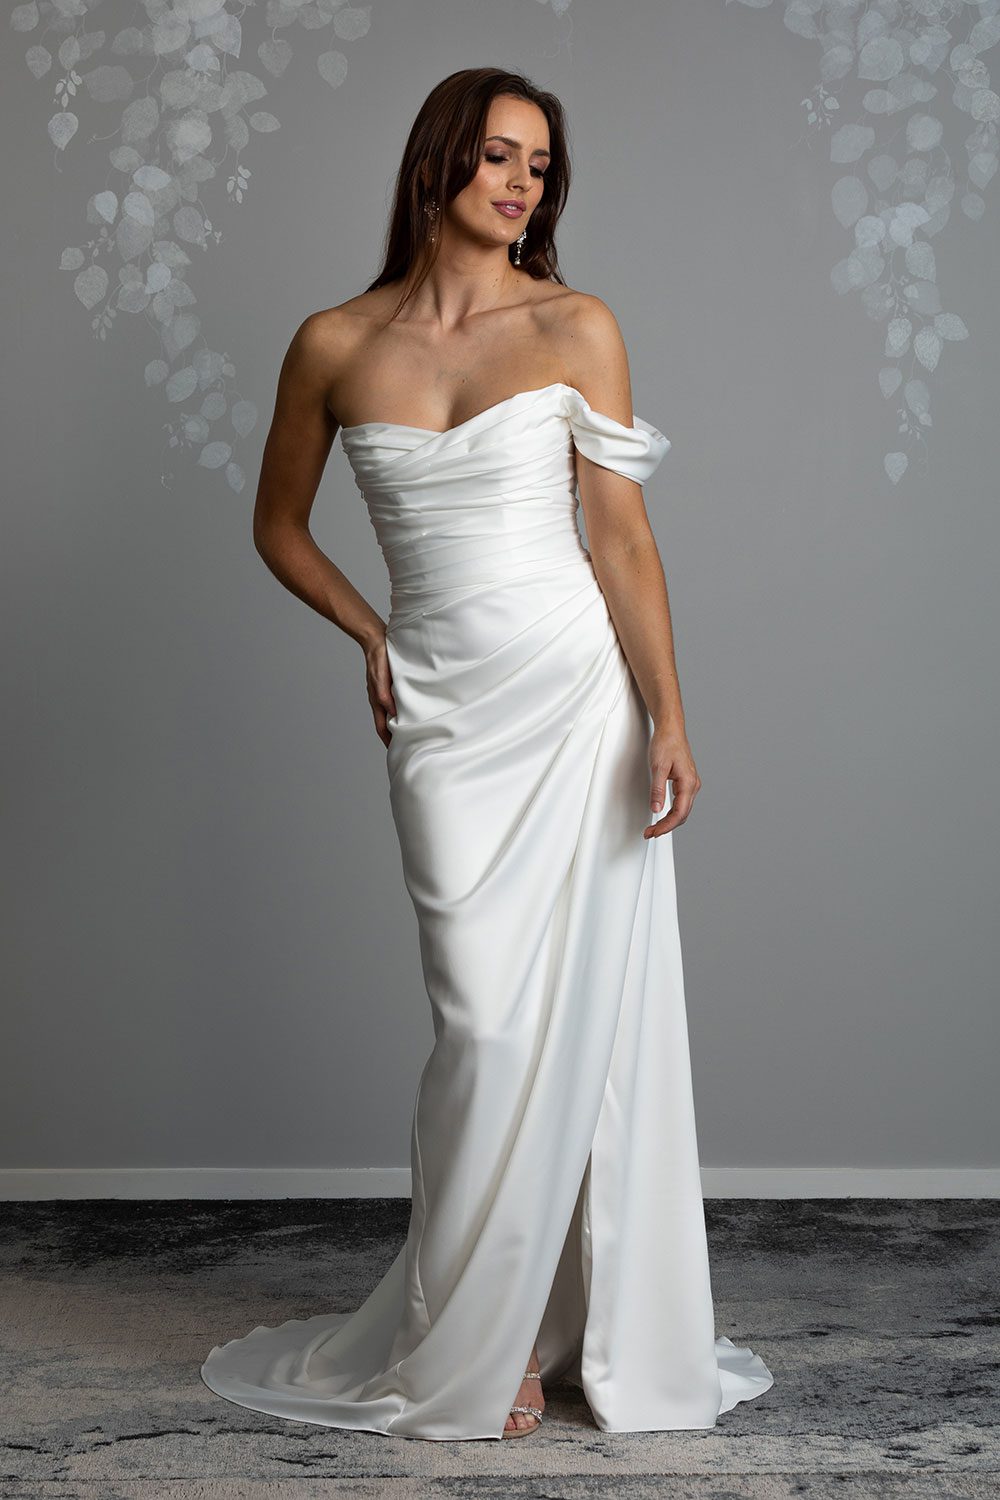 Christina Wedding Dress by Vinka Design - Featuring a sculptured, fitted bodice with a scoop neckline that flows seamlessly into a beautiful off shoulder detail. The draping from the bodice drops from the hips into a gentle fit and flare skirt, falling into an elegant train and features a concealed side split that reveals a subtle hint of leg. Model looking over shoulder with hand to hip wearing delicately draped silky satin dress over a fitted bodice and one shoulder detail